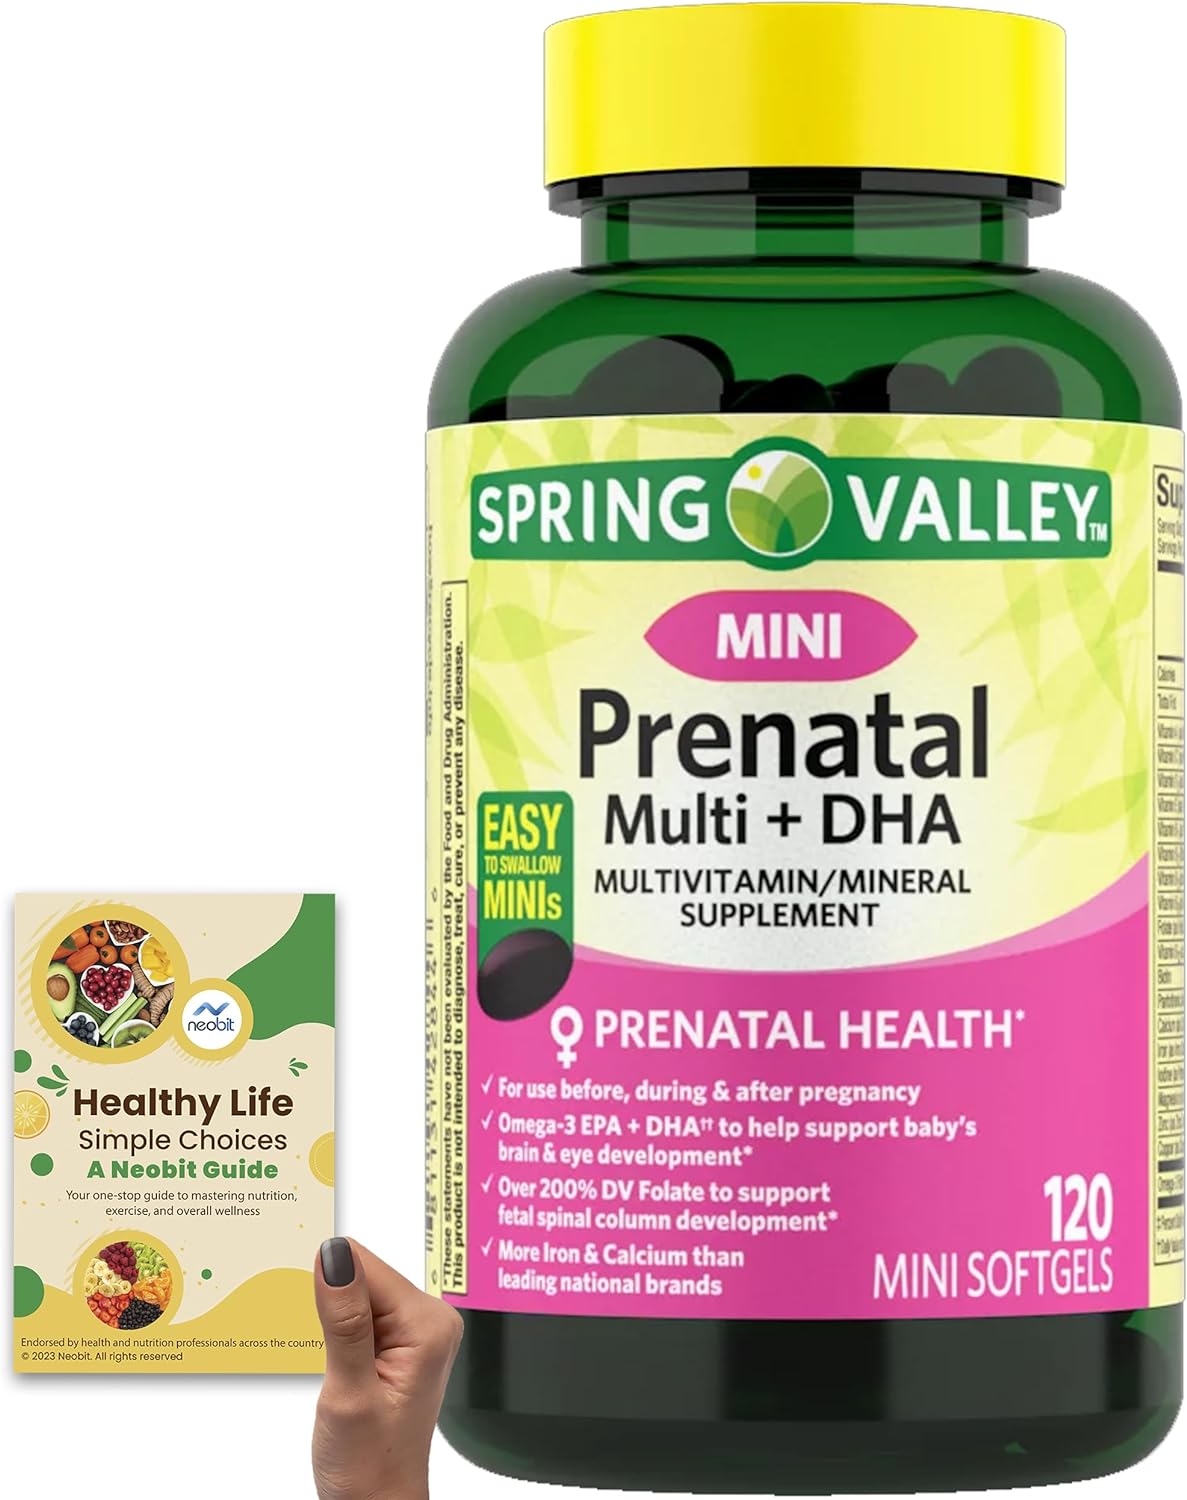 Spring Valley Mini Prenatal Multi + DHA Softgels, 120 Count - Complete Multivitamin/Multimineral Supplement with Omega-3 Fatty Acids EPA and DHA + Healthy Life, Simple Choices: Guide (2 Items)